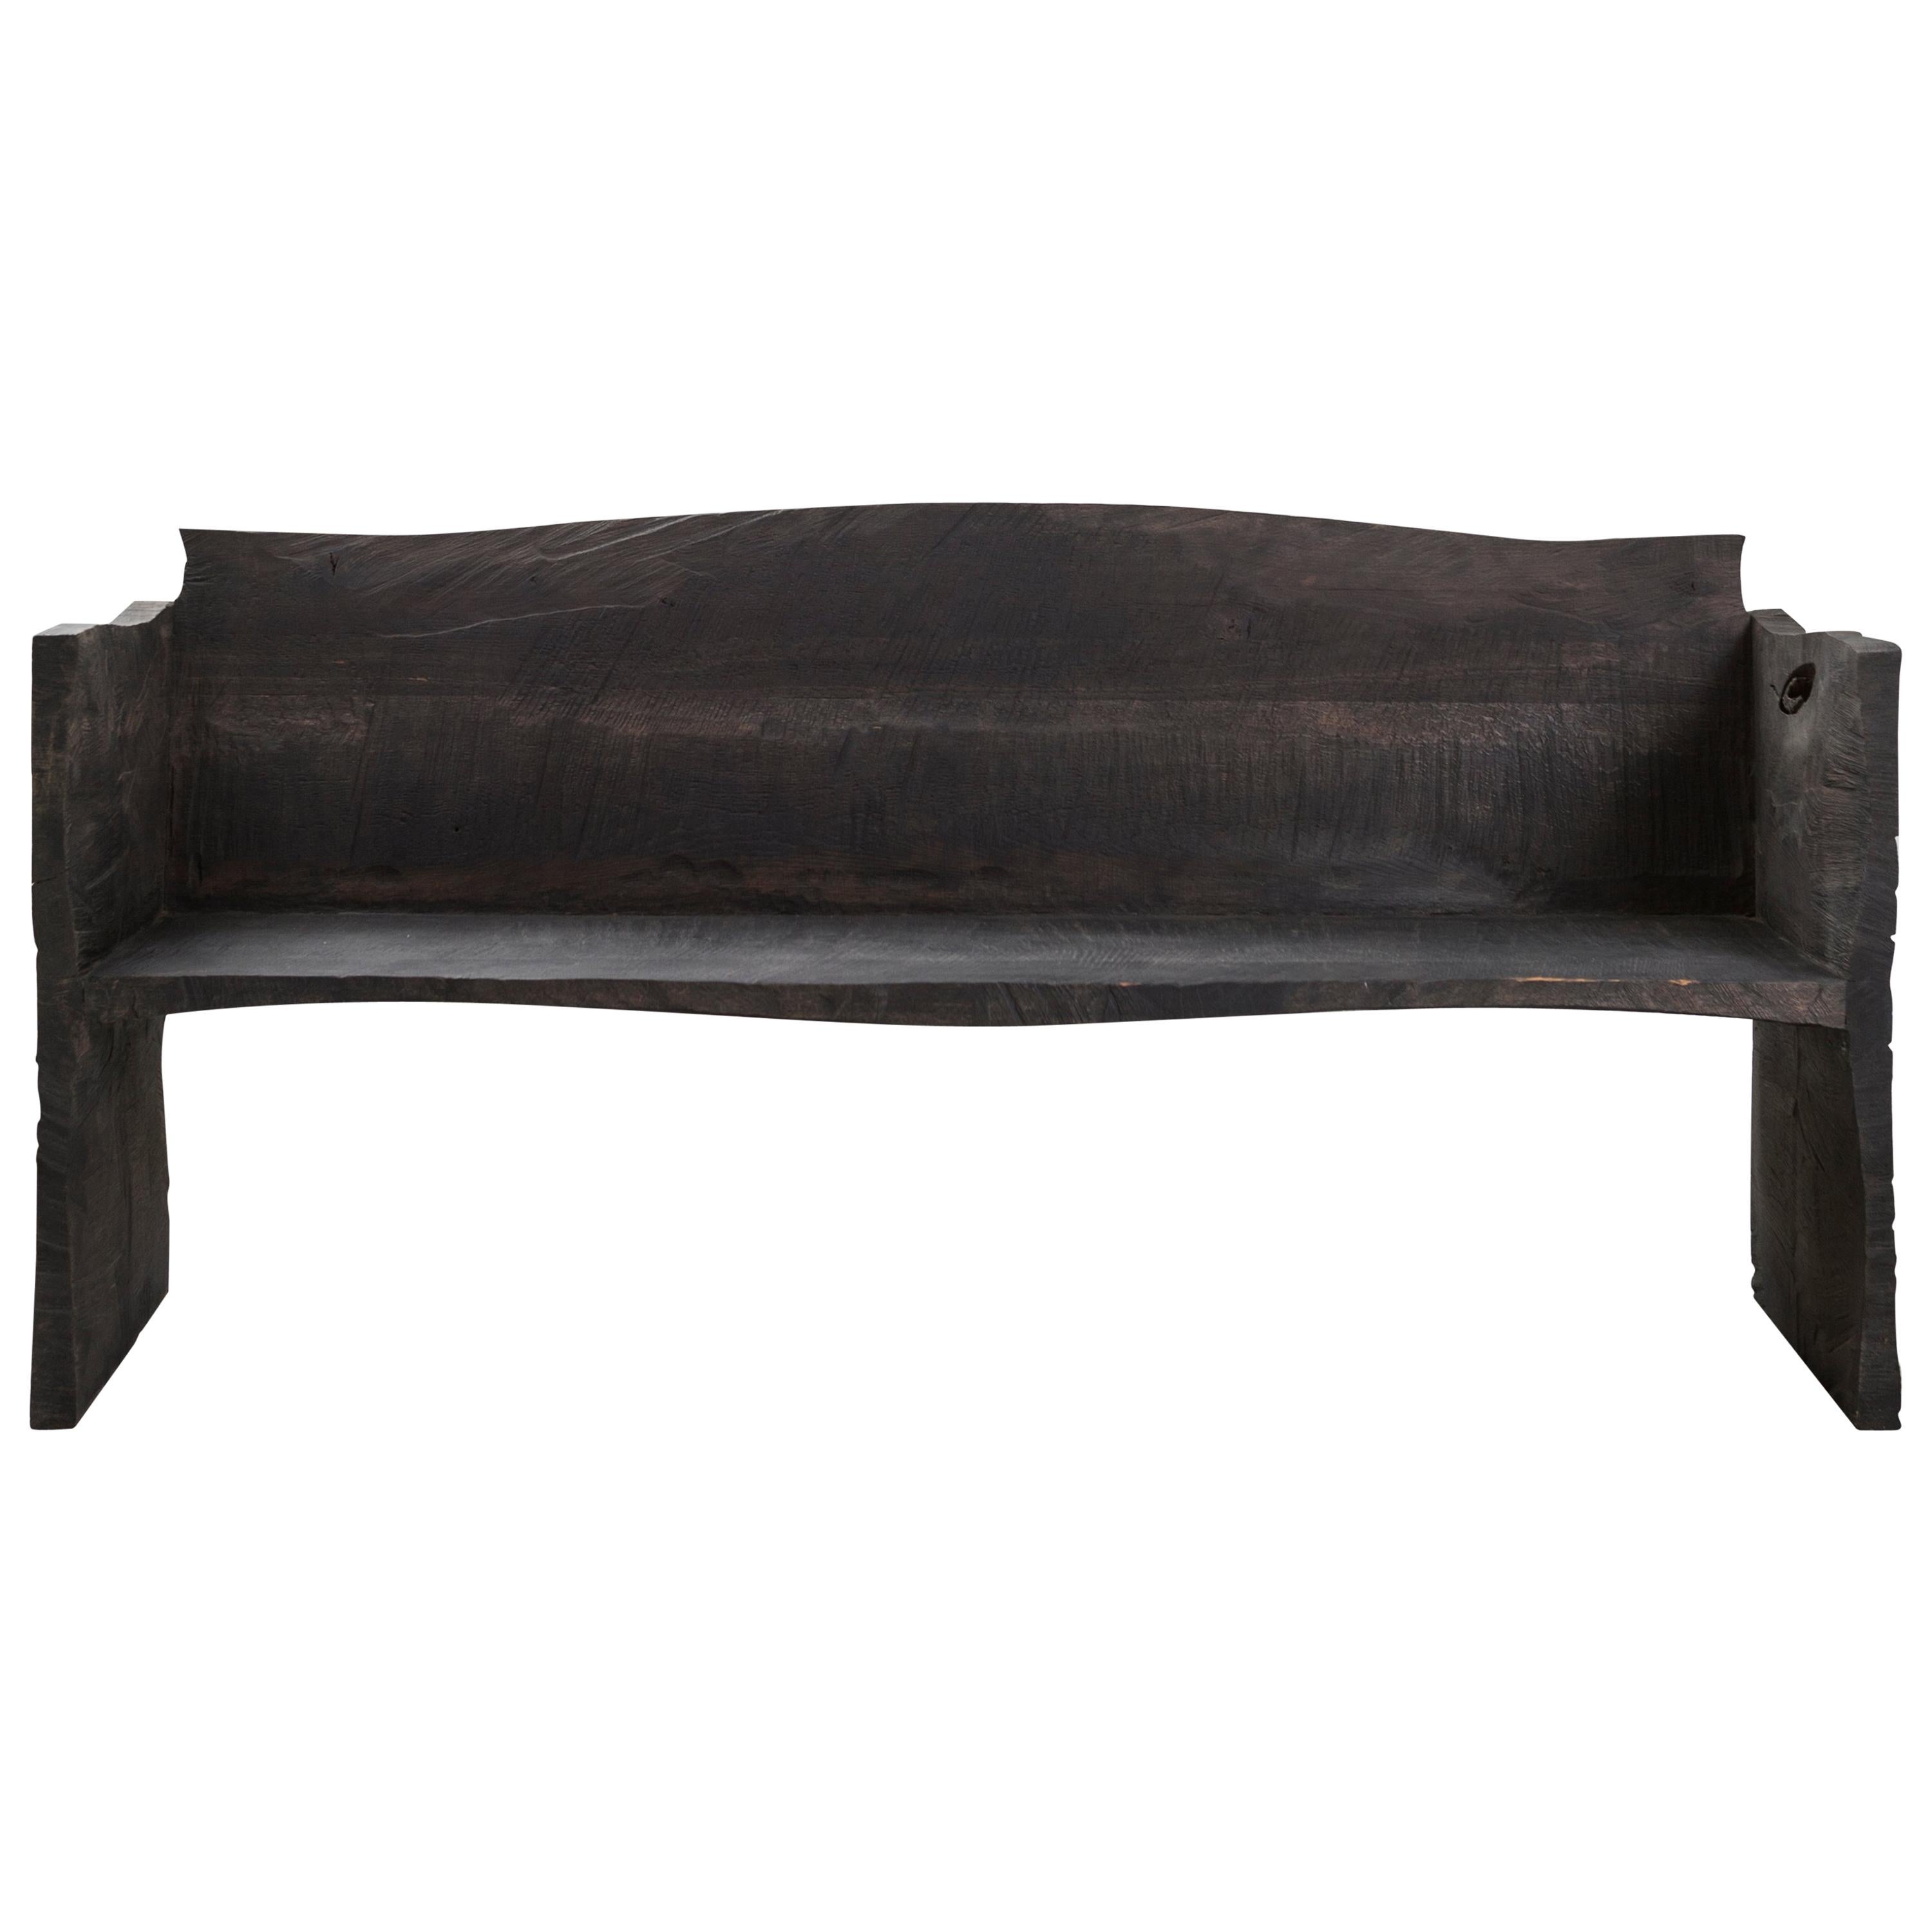 Contemporary Brutalist Style Bench in Solid Oak ‘Dark’ and Linseed Oil